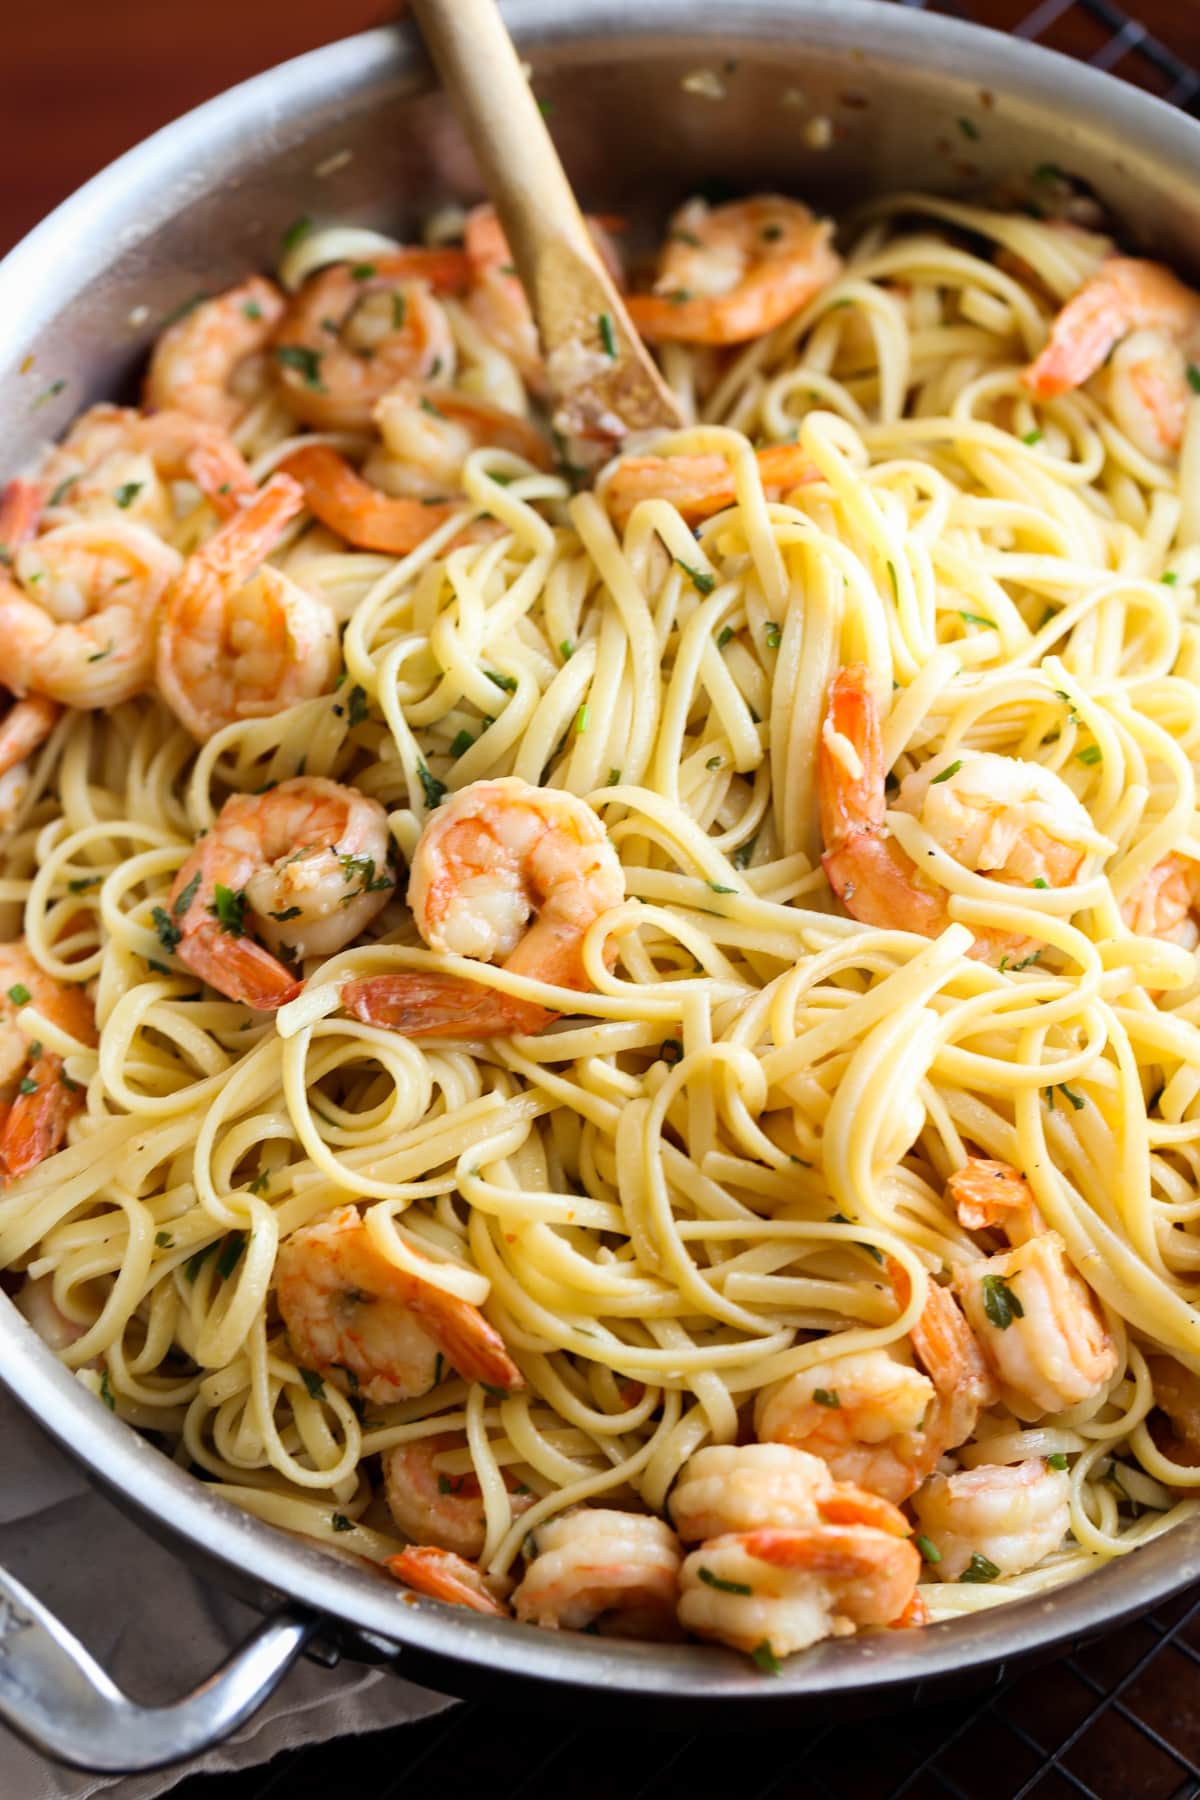 Shrimp scampi in a pan with linguine.